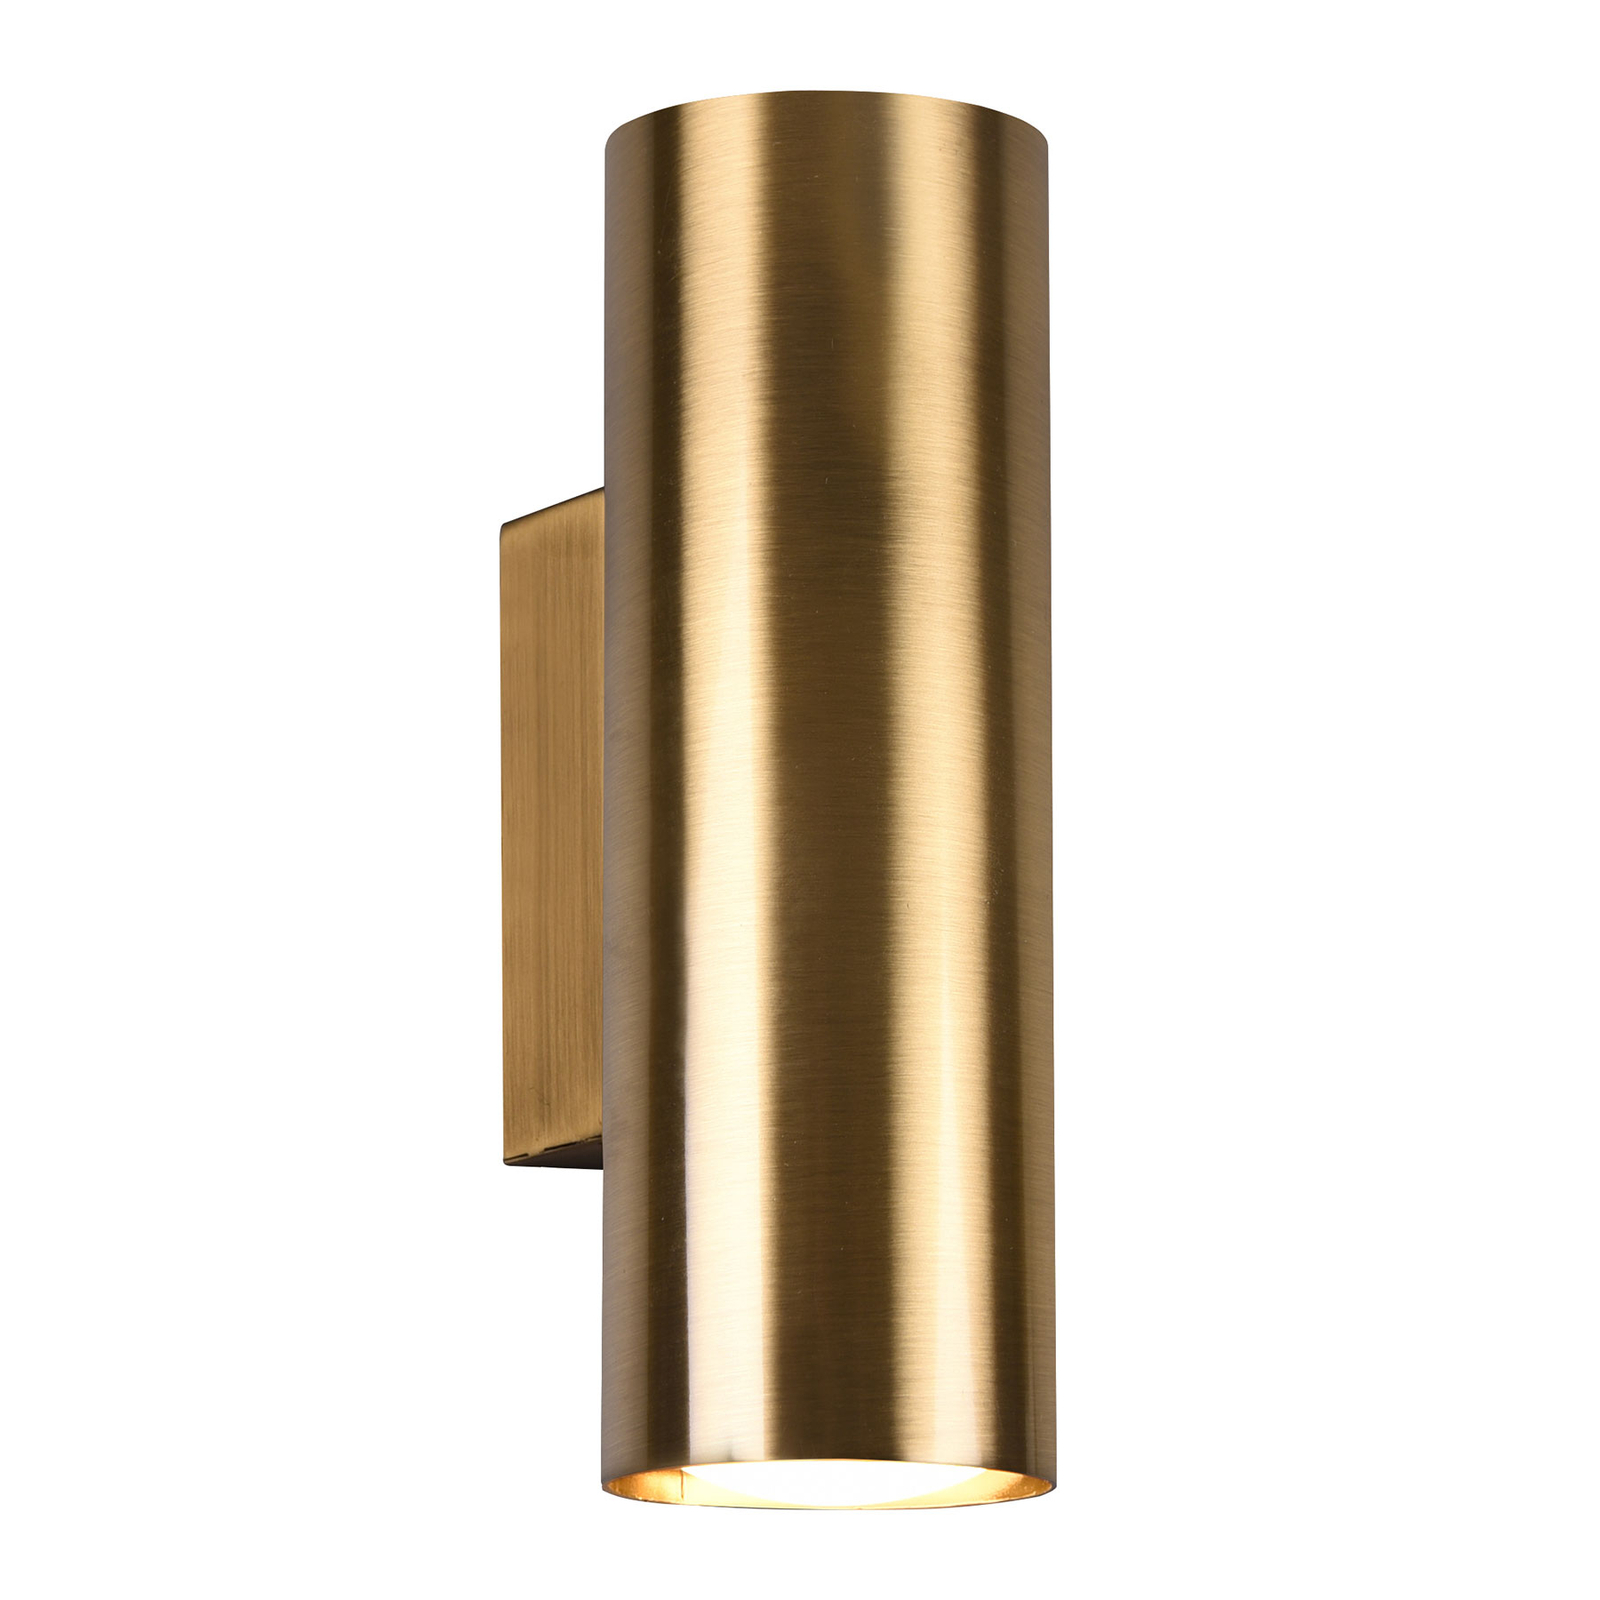 Marley wall light, antique brass, up and down